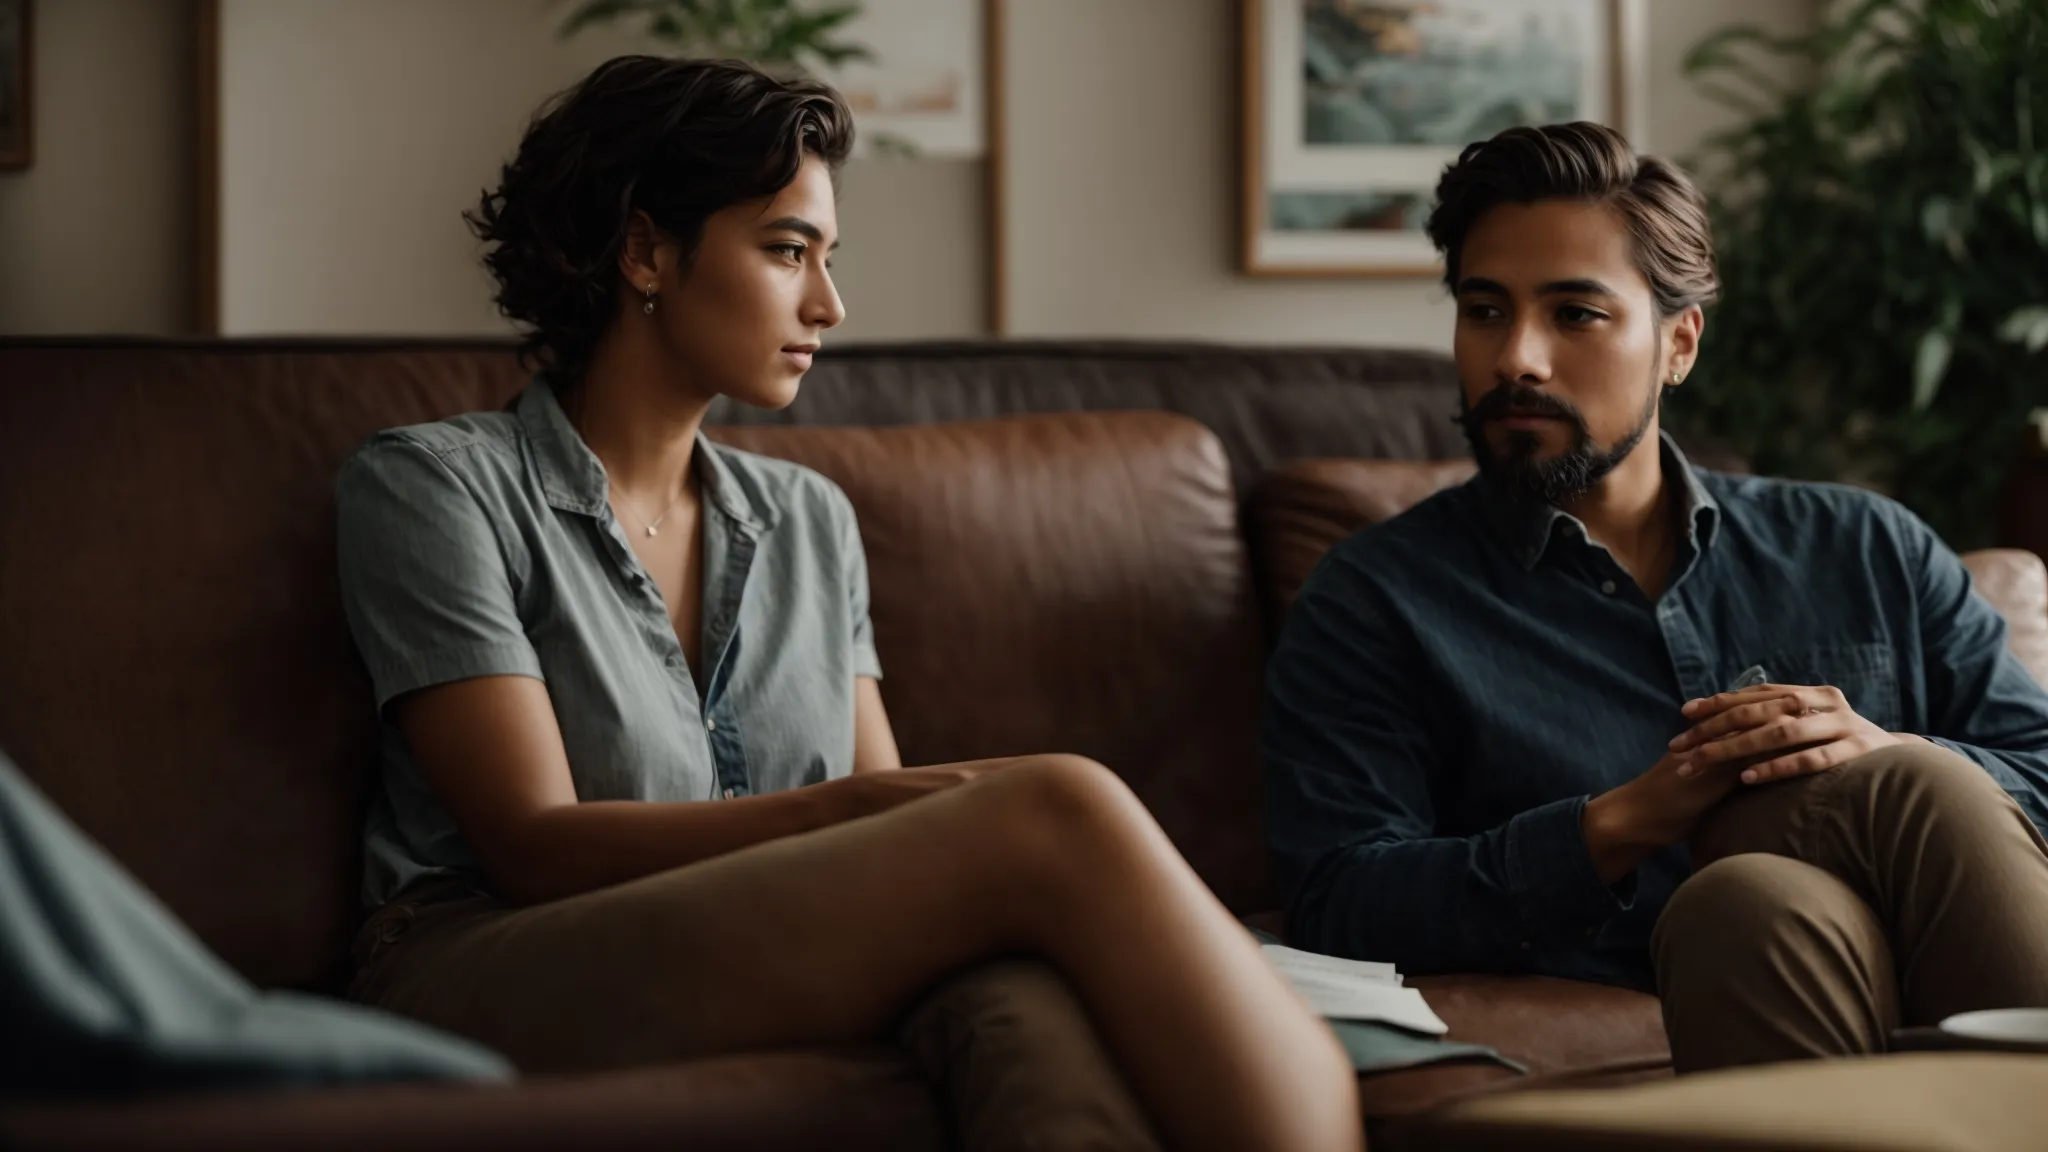 a couple is seated closely on a couch, engaging in deep conversation with a comforting therapist guiding the discussion.